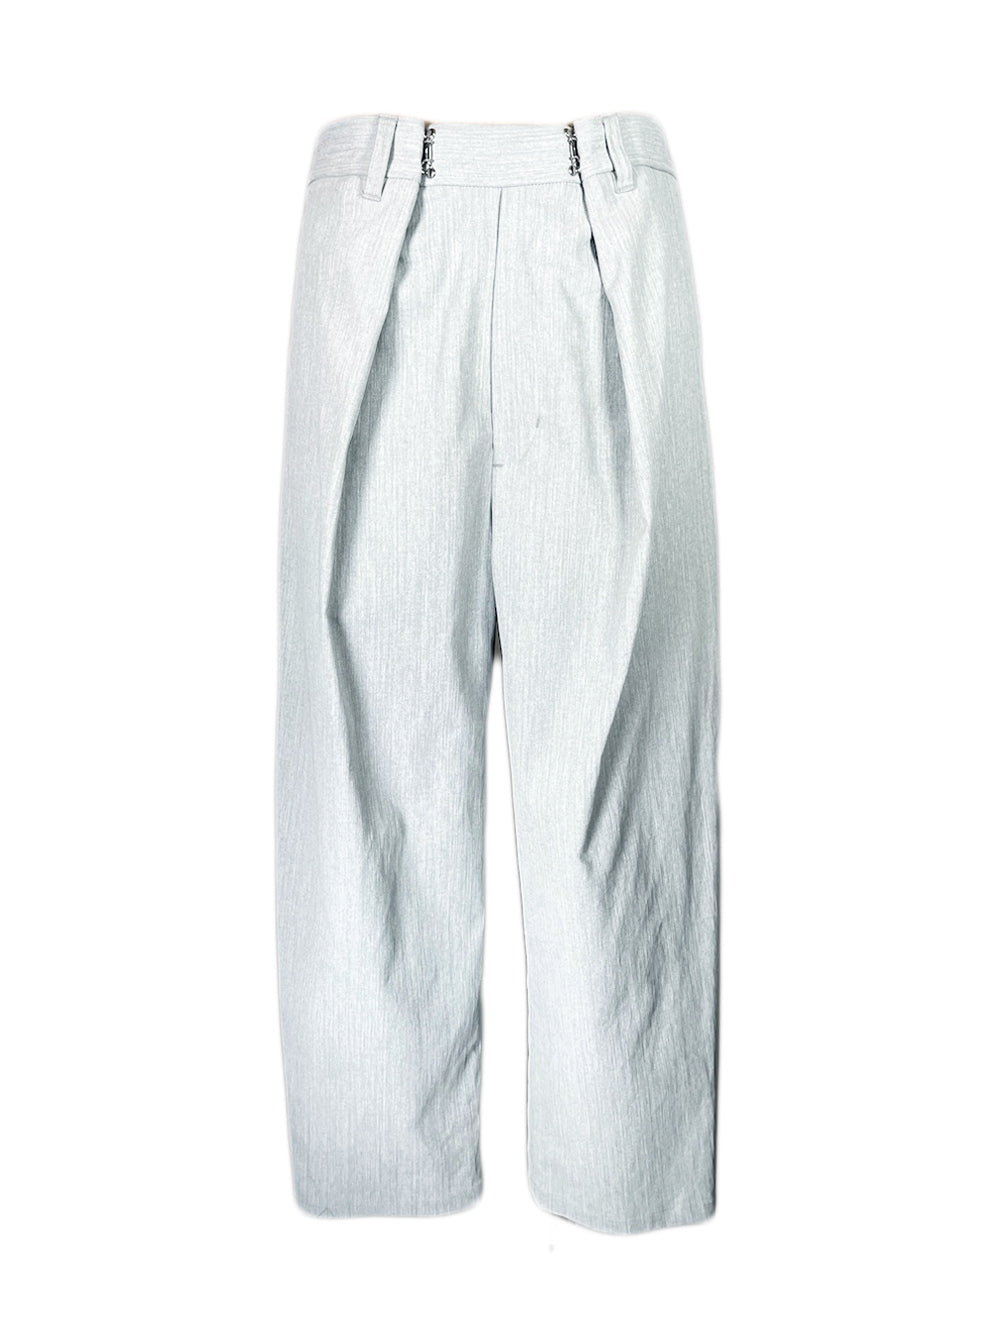 LB23SS-PT02-PDN | Pigment Dyed Customized Tuck Trousers | WHITE PIGMENT DYED